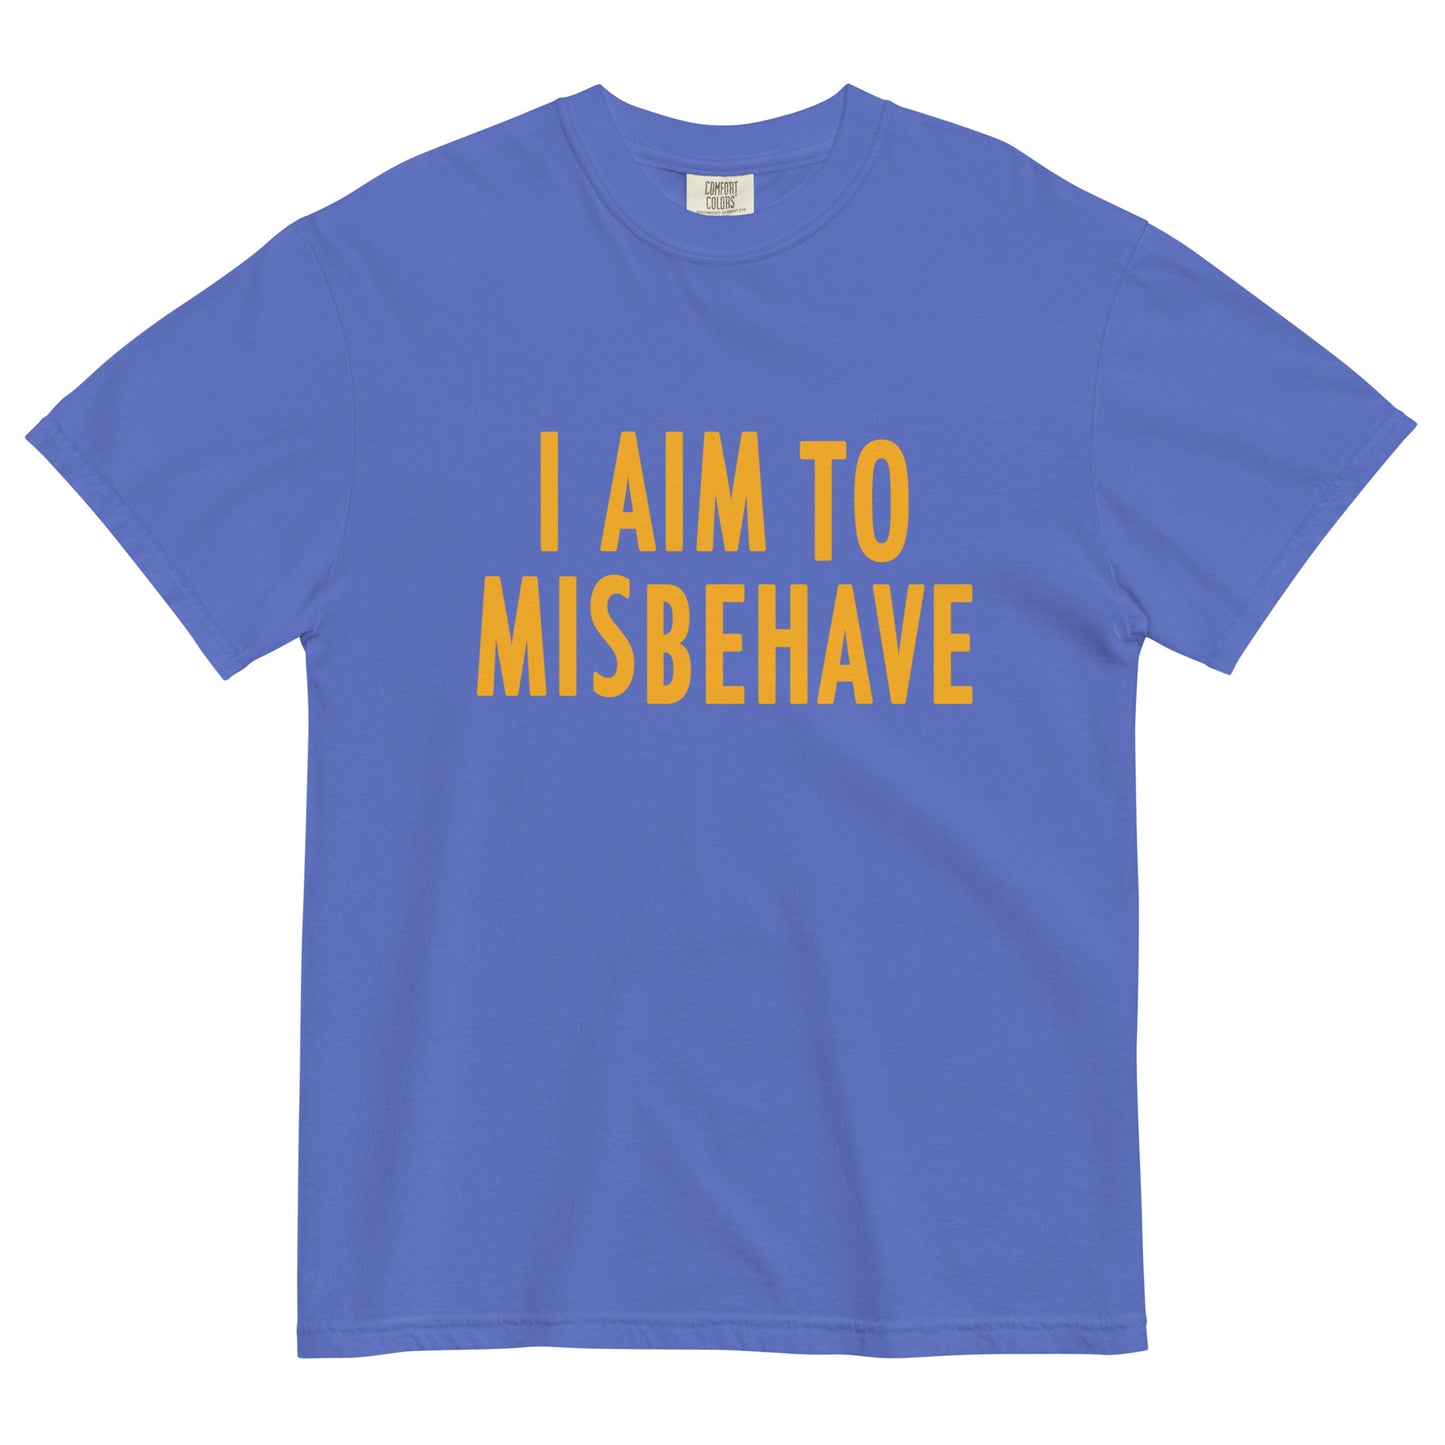 I Aim To Misbehave Men's Relaxed Fit Tee